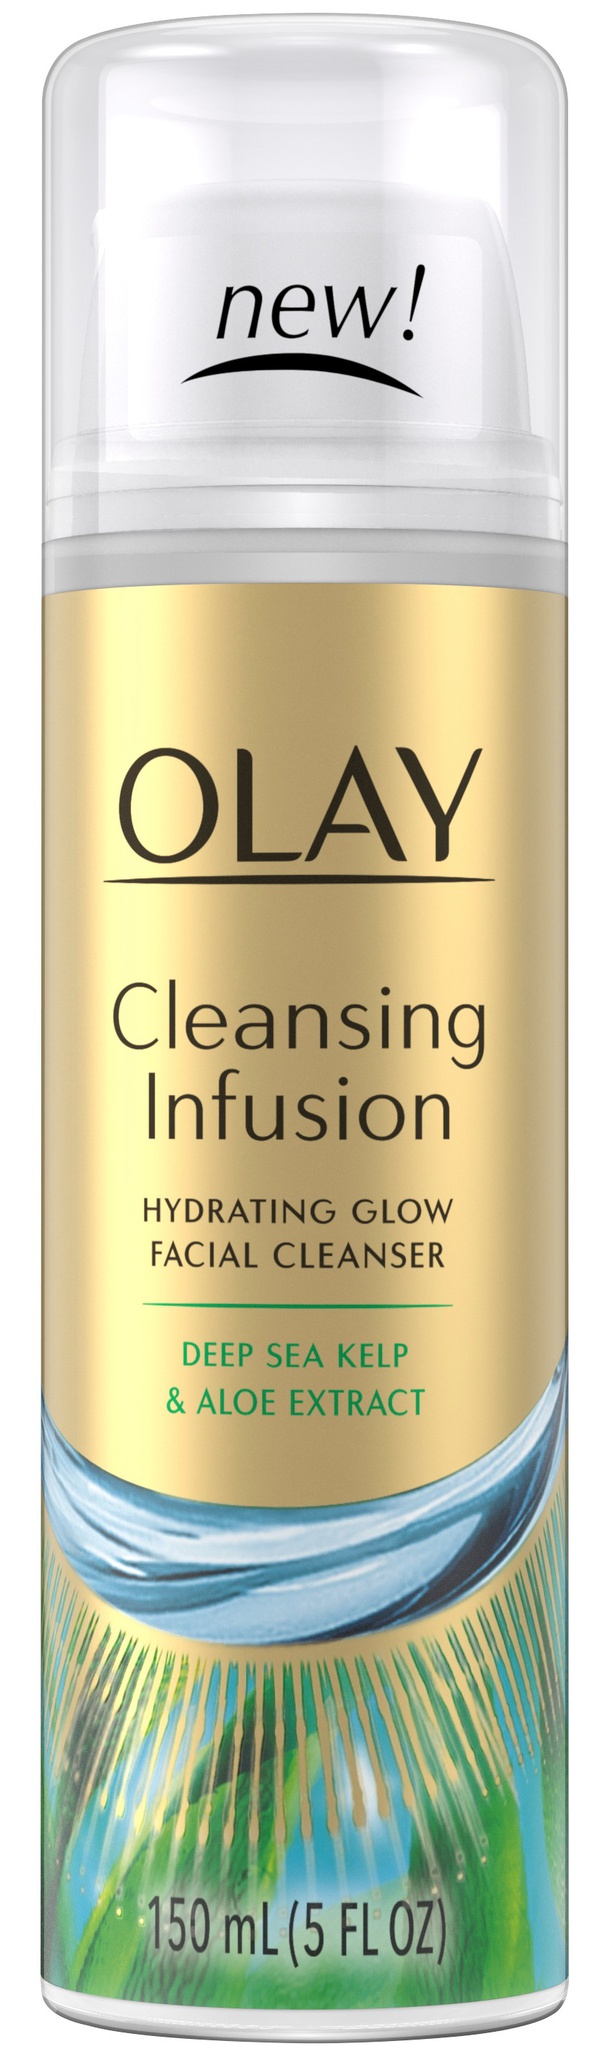 Olay Cleansing Infusion Hydrating Glow Facial Cleanser With Deep Sea Kelp & Aloe Extract